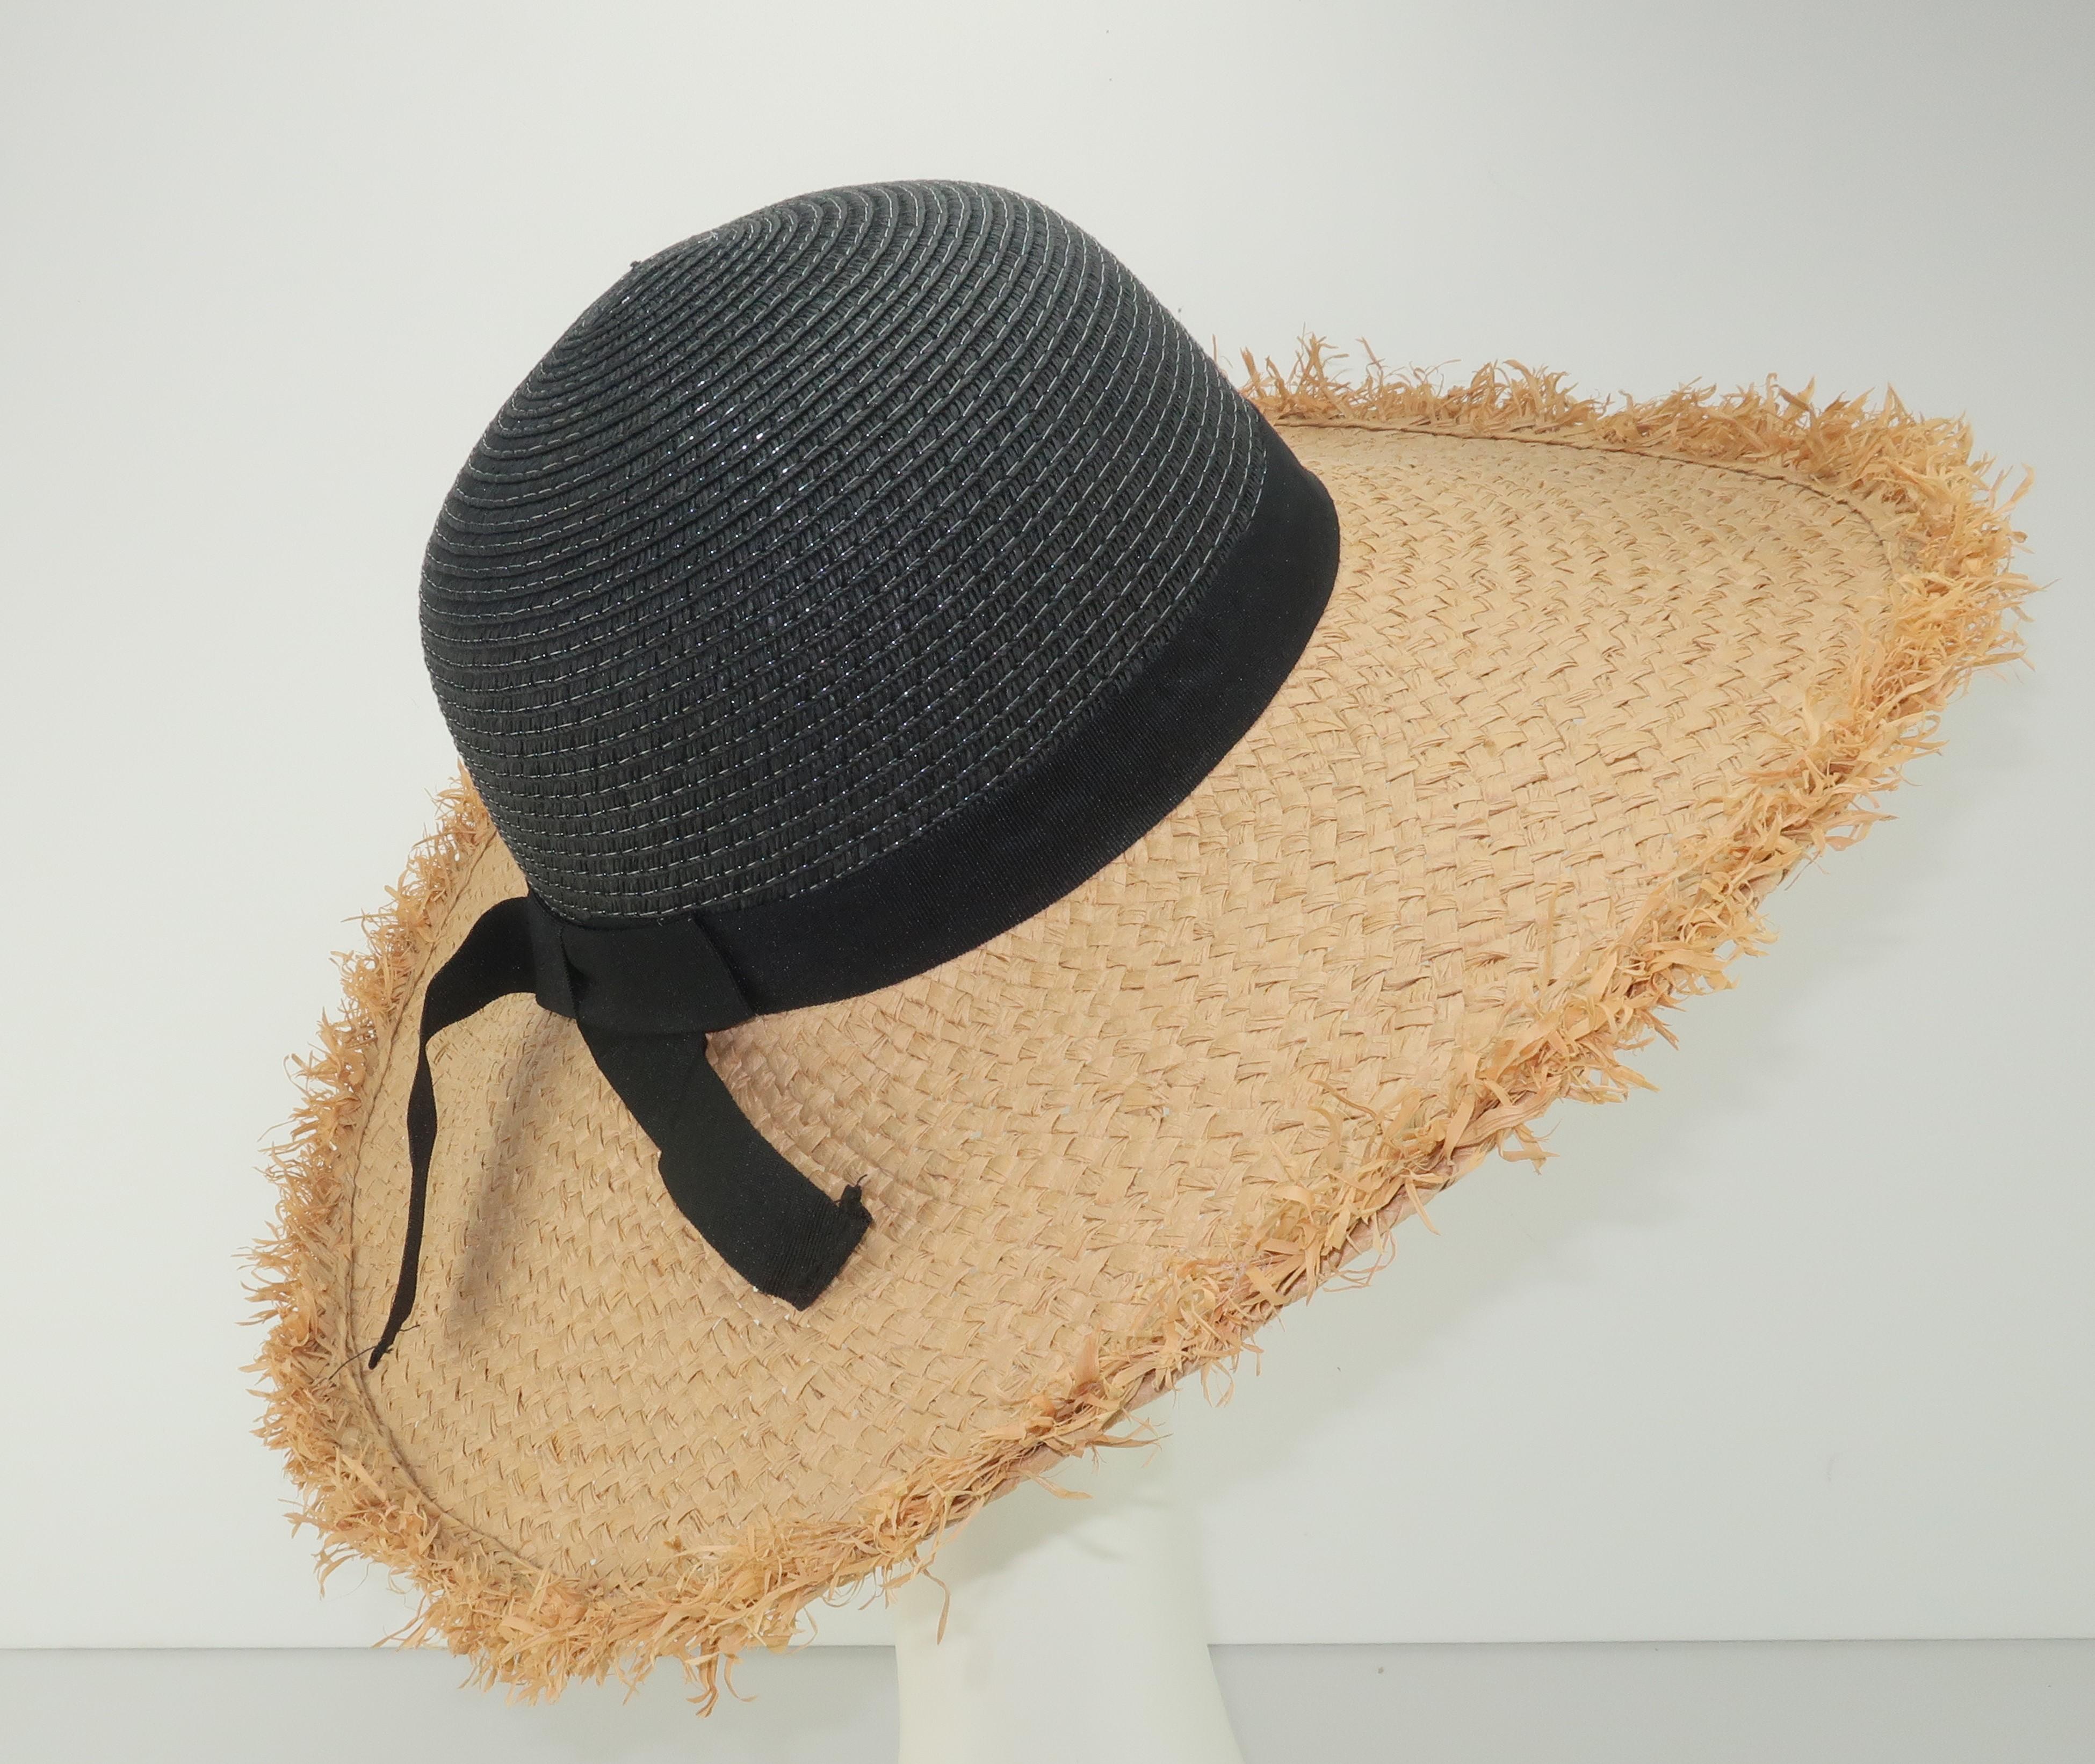 Isaac Mizrahi paper straw hat in a combination of natural and black with a black grosgrain ribbon band.  The fringed edges to the brim lends the hat a vintage 'tiki' look perfect for beach wear.  
CONDITION
Good previously owned condition.  No